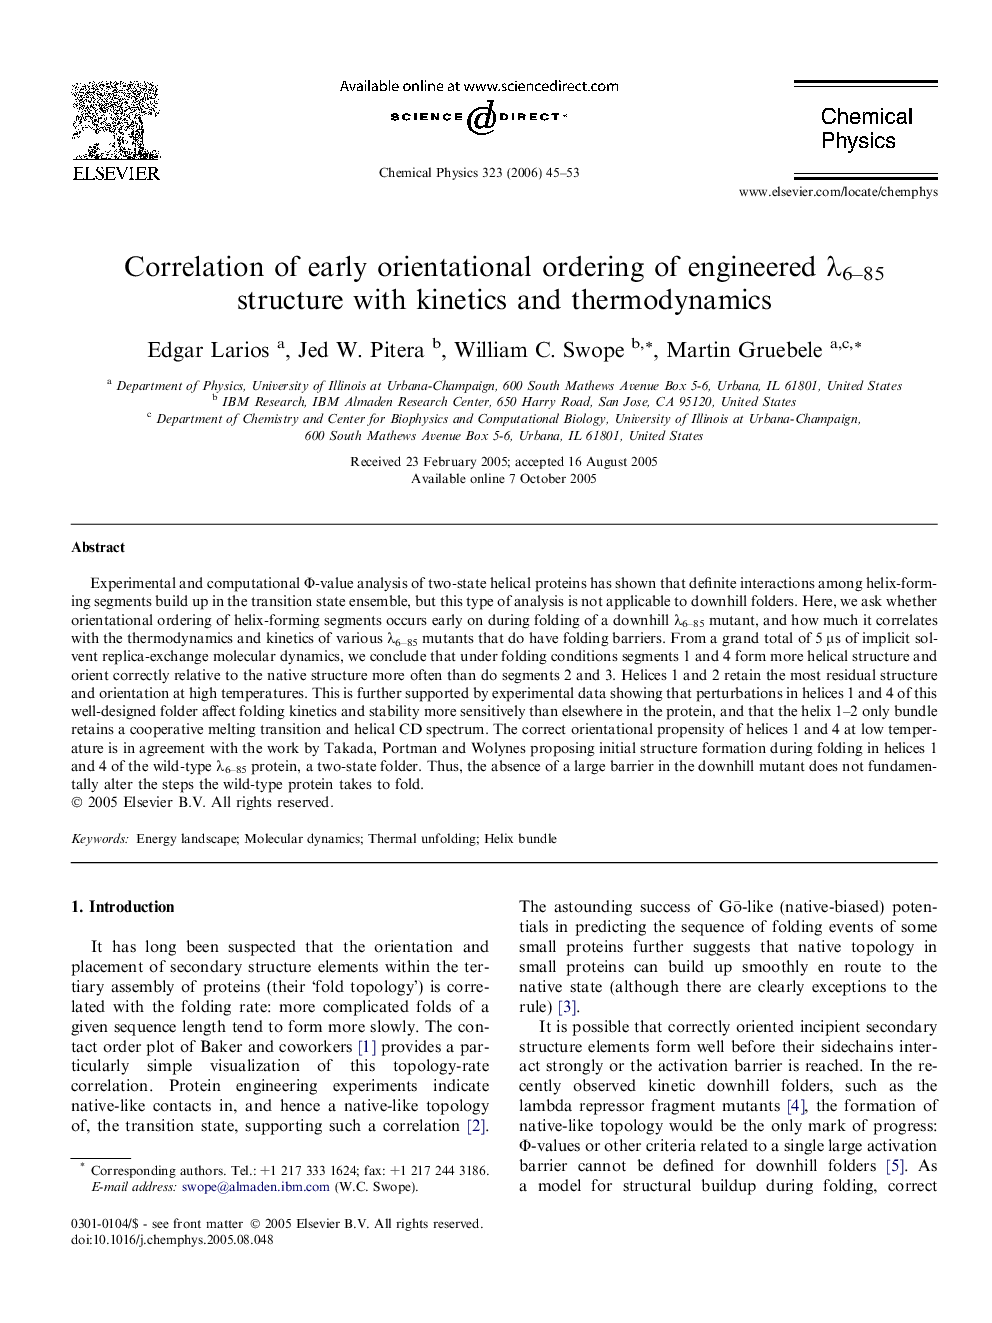 Correlation of early orientational ordering of engineered Î»6-85 structure with kinetics and thermodynamics